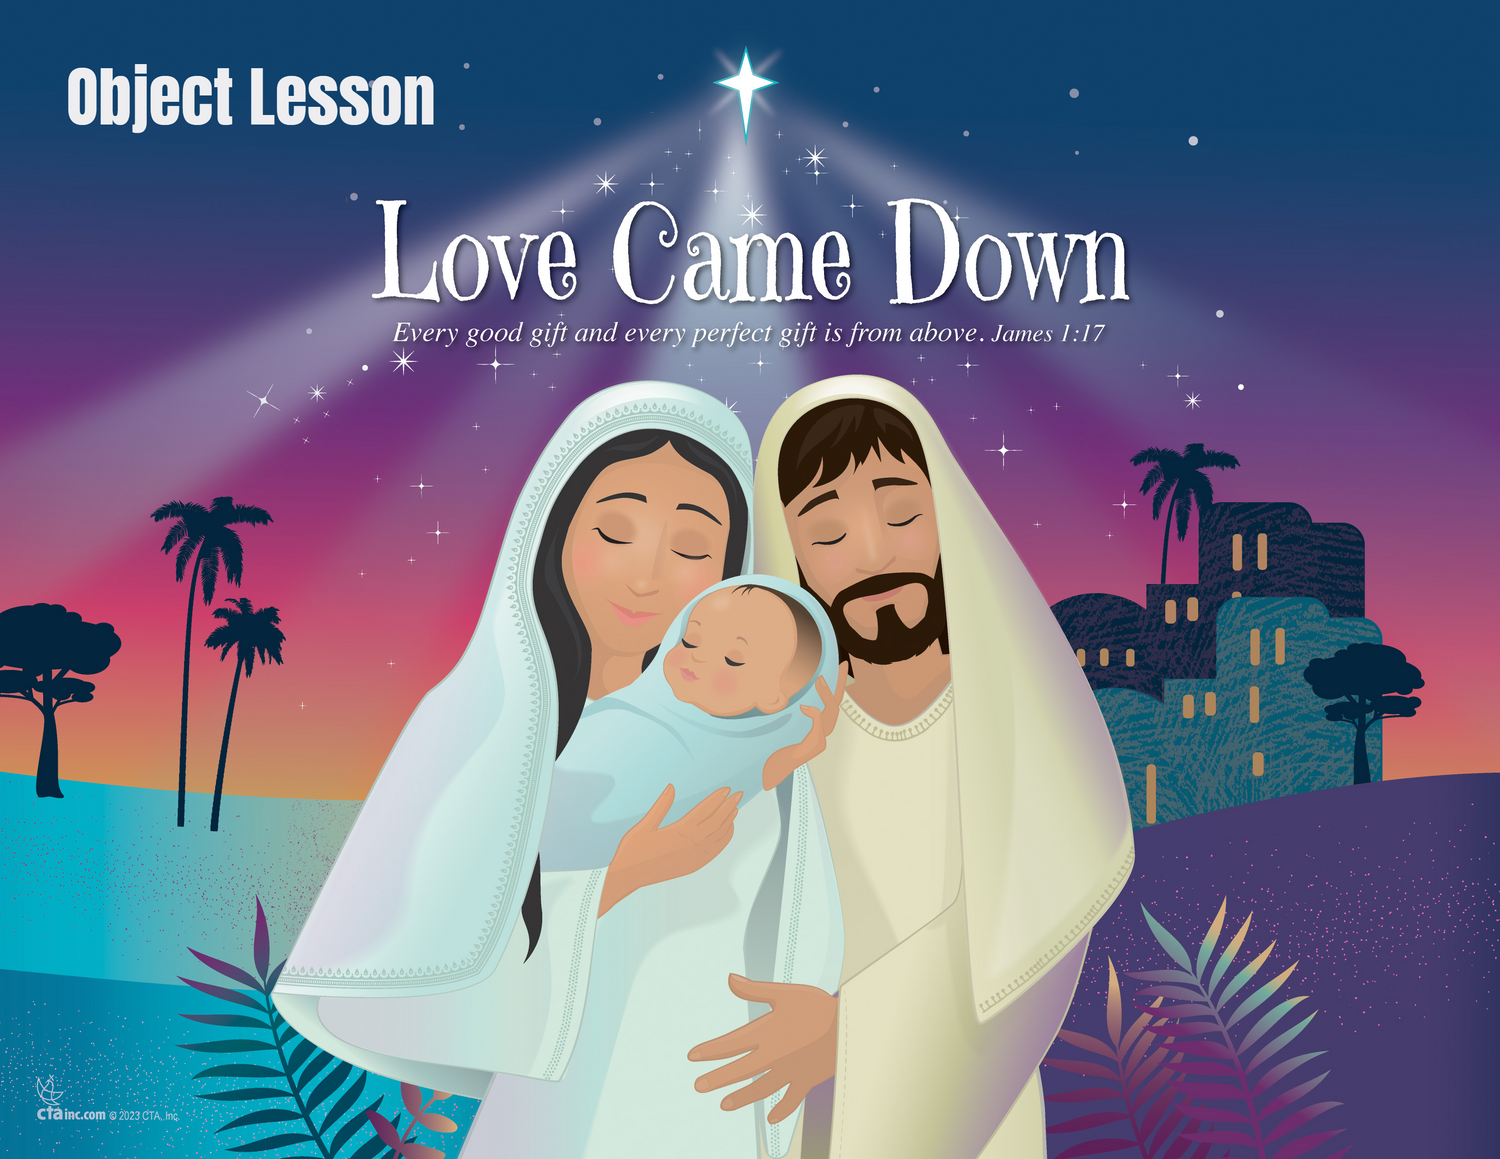 Devotional Object Lesson - Love Came Down